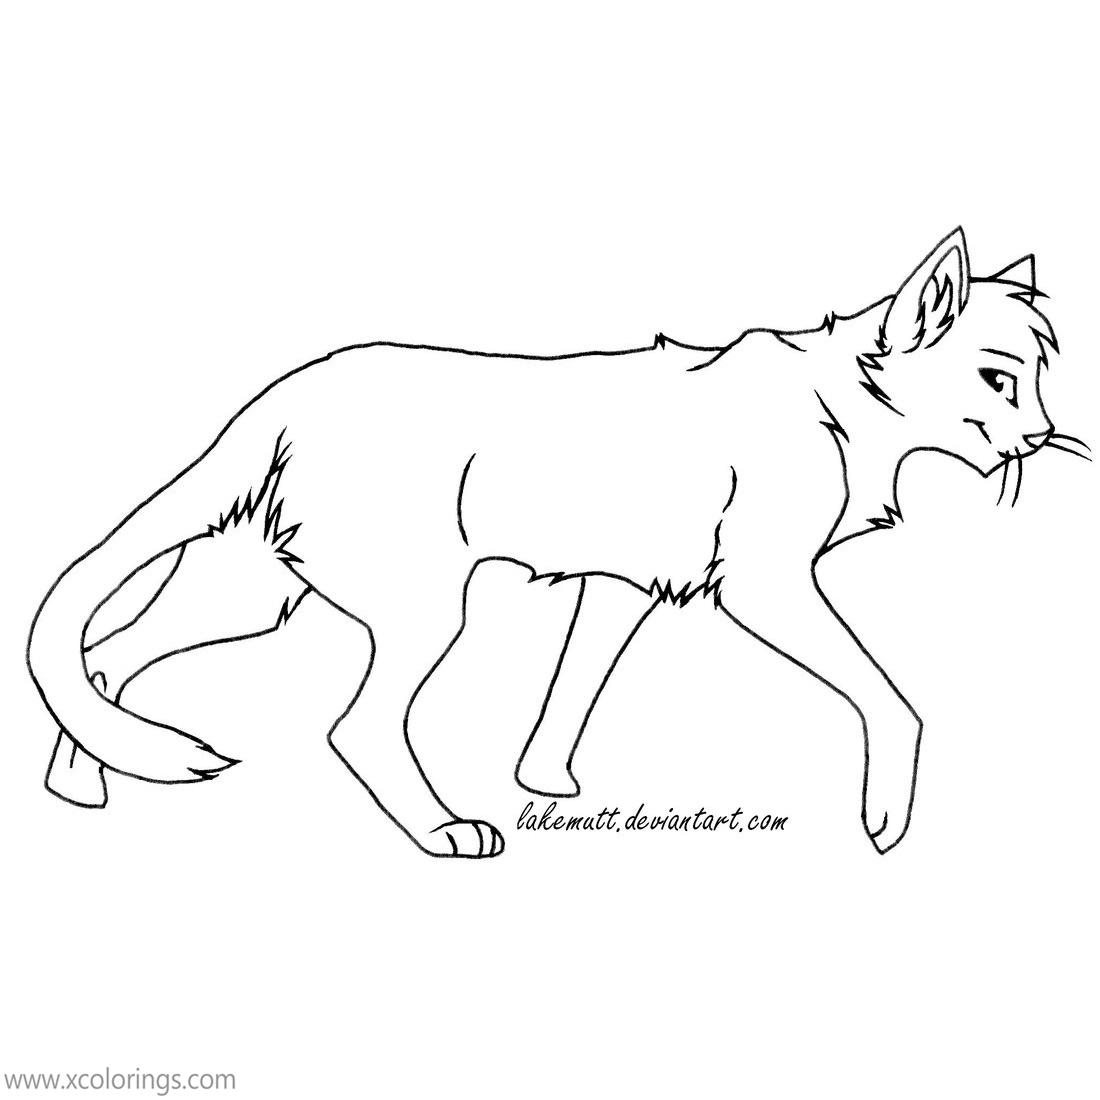 Free Warrior Cat Coloring Pages Artwork by Lakemutt printable